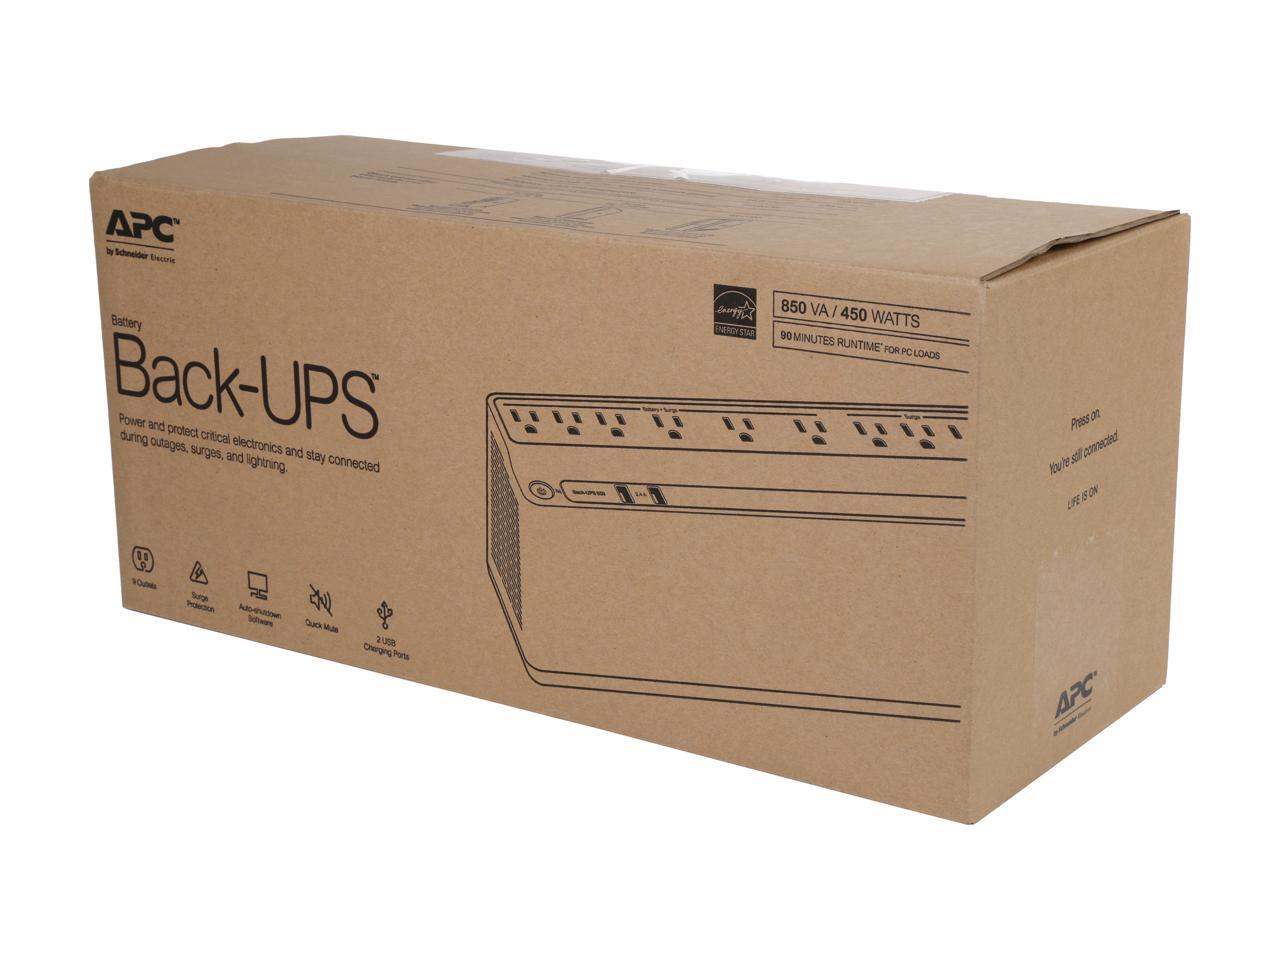 APC BE850M2 850 VA 450 Watts 9 Outlets UPS Back Up Power Supply (Step